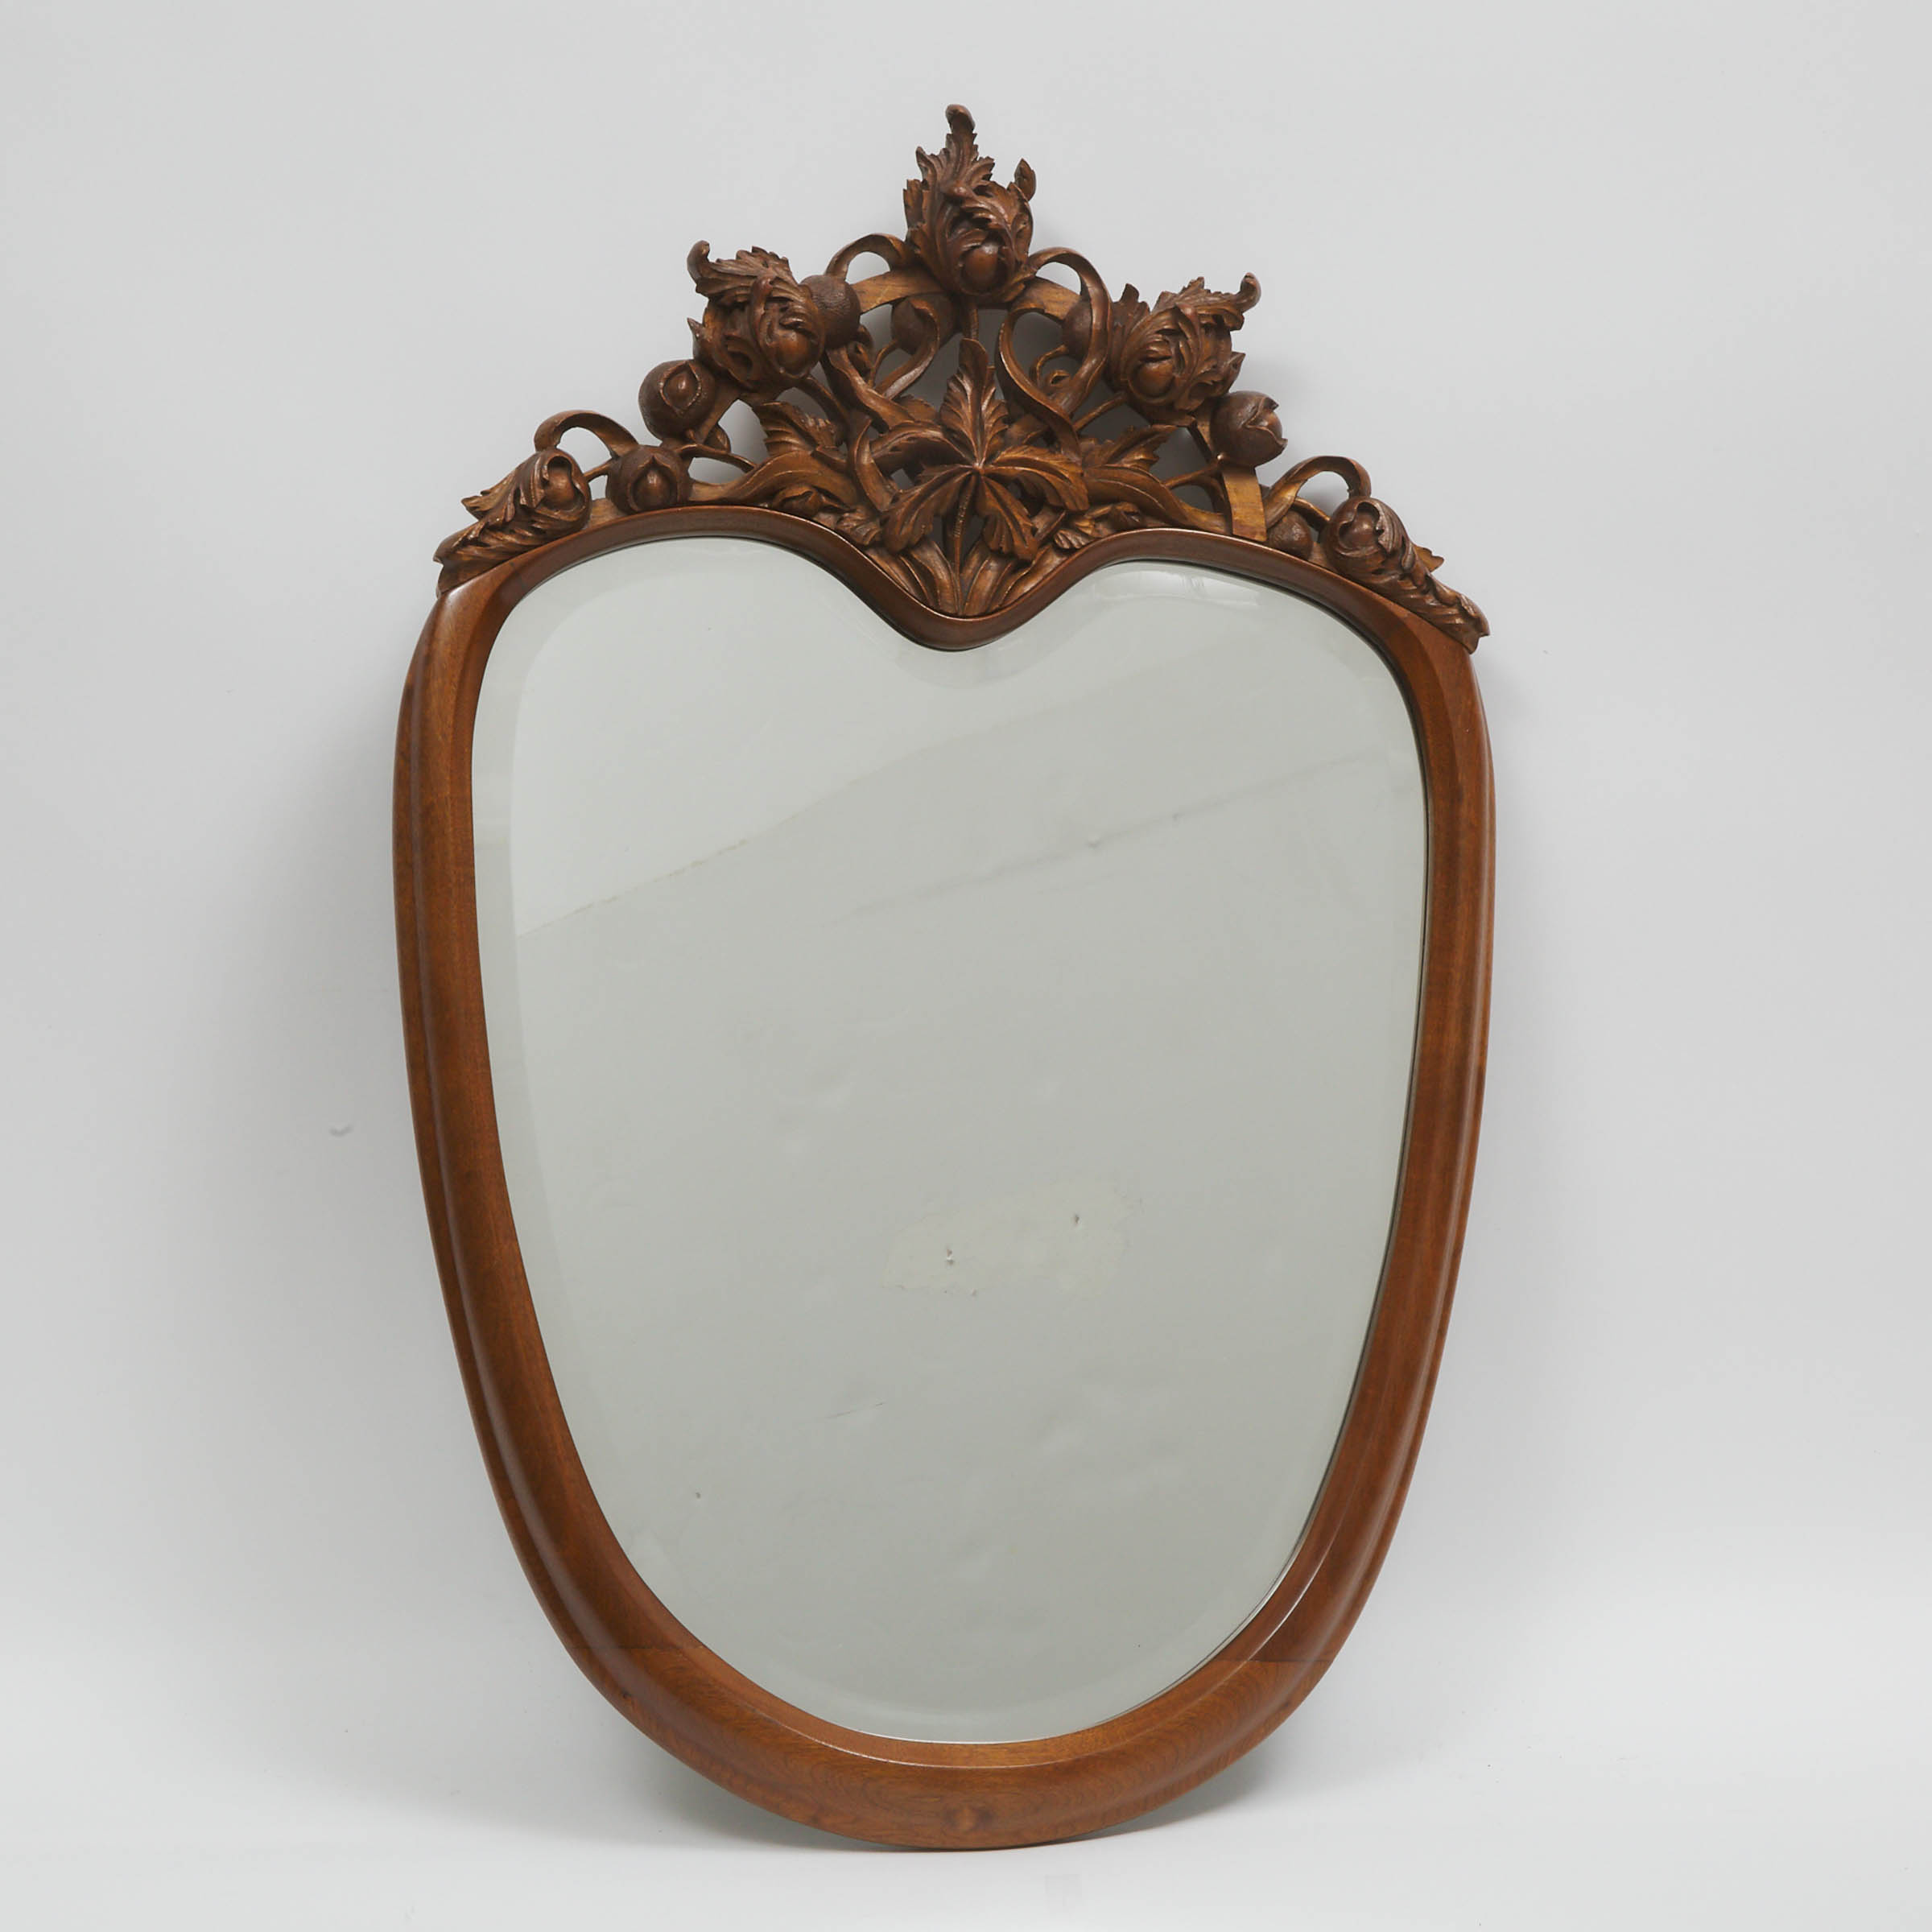 Contemporary Carved Walnut Mirror by André Ransberry, (Canadian, 1944-2020), late 20th century